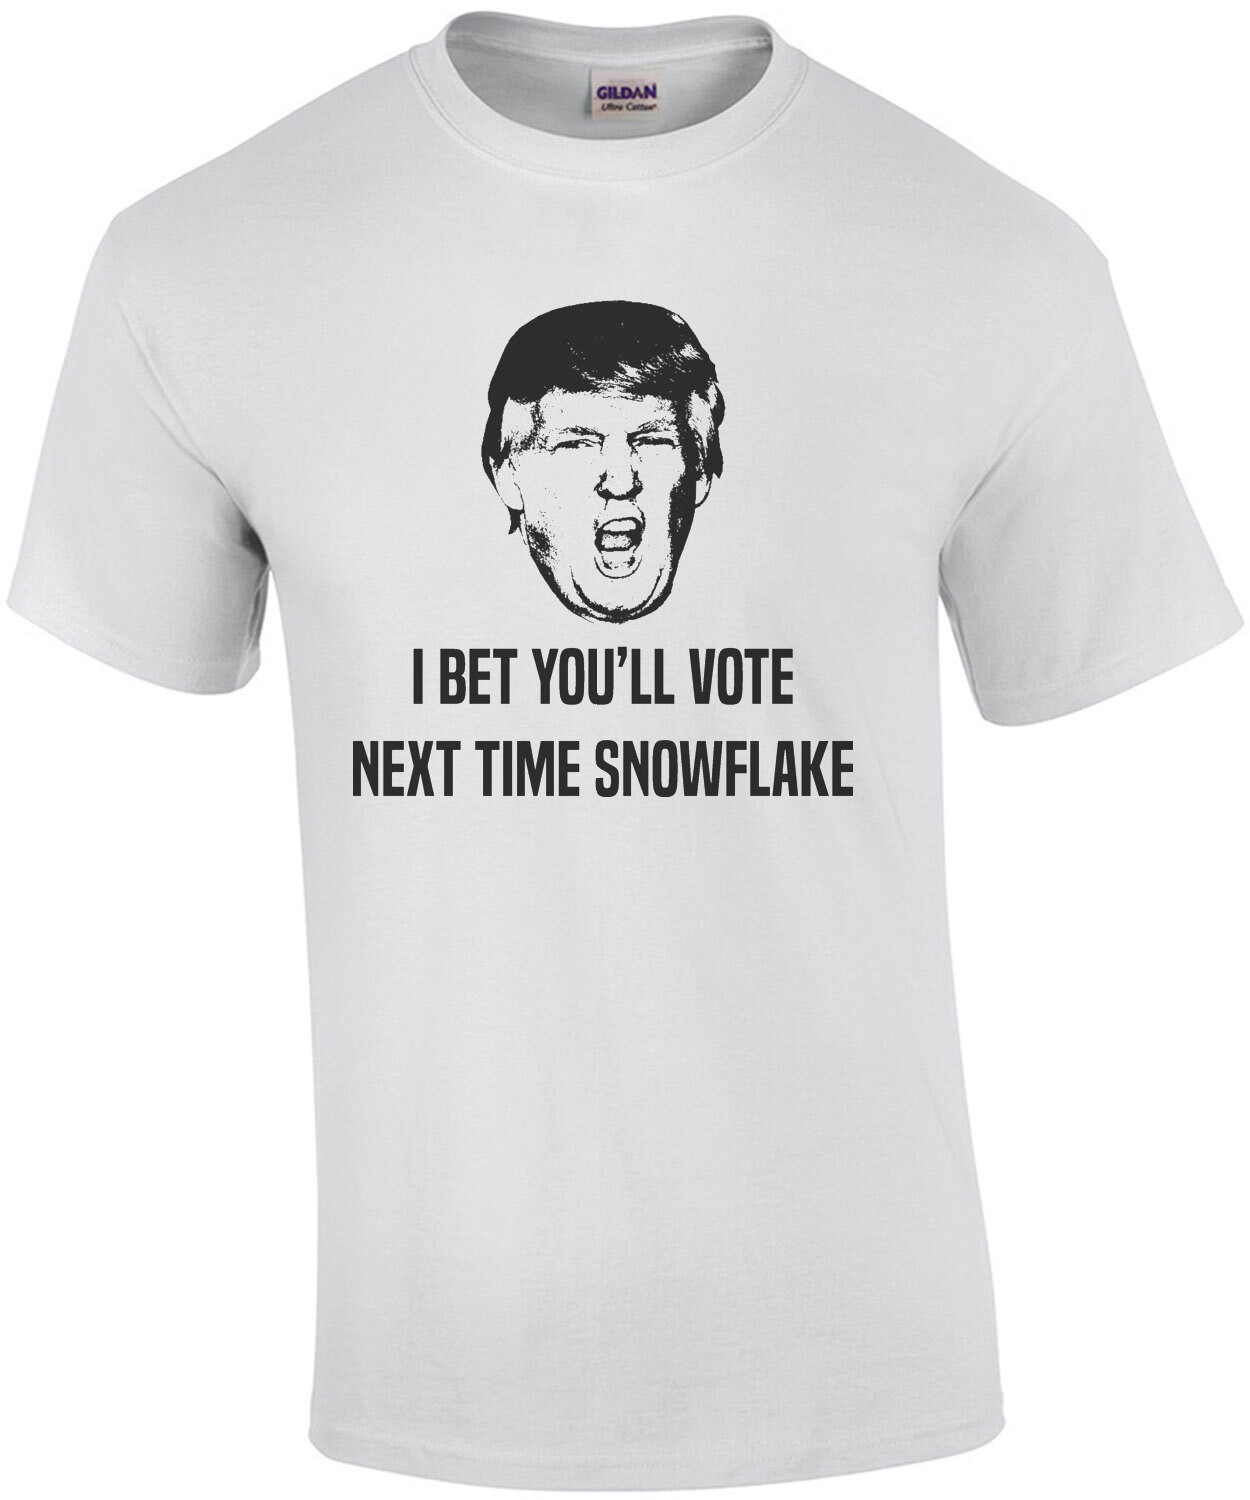 I bet you vote next time snowflake - funny trump election2020 t-shirt